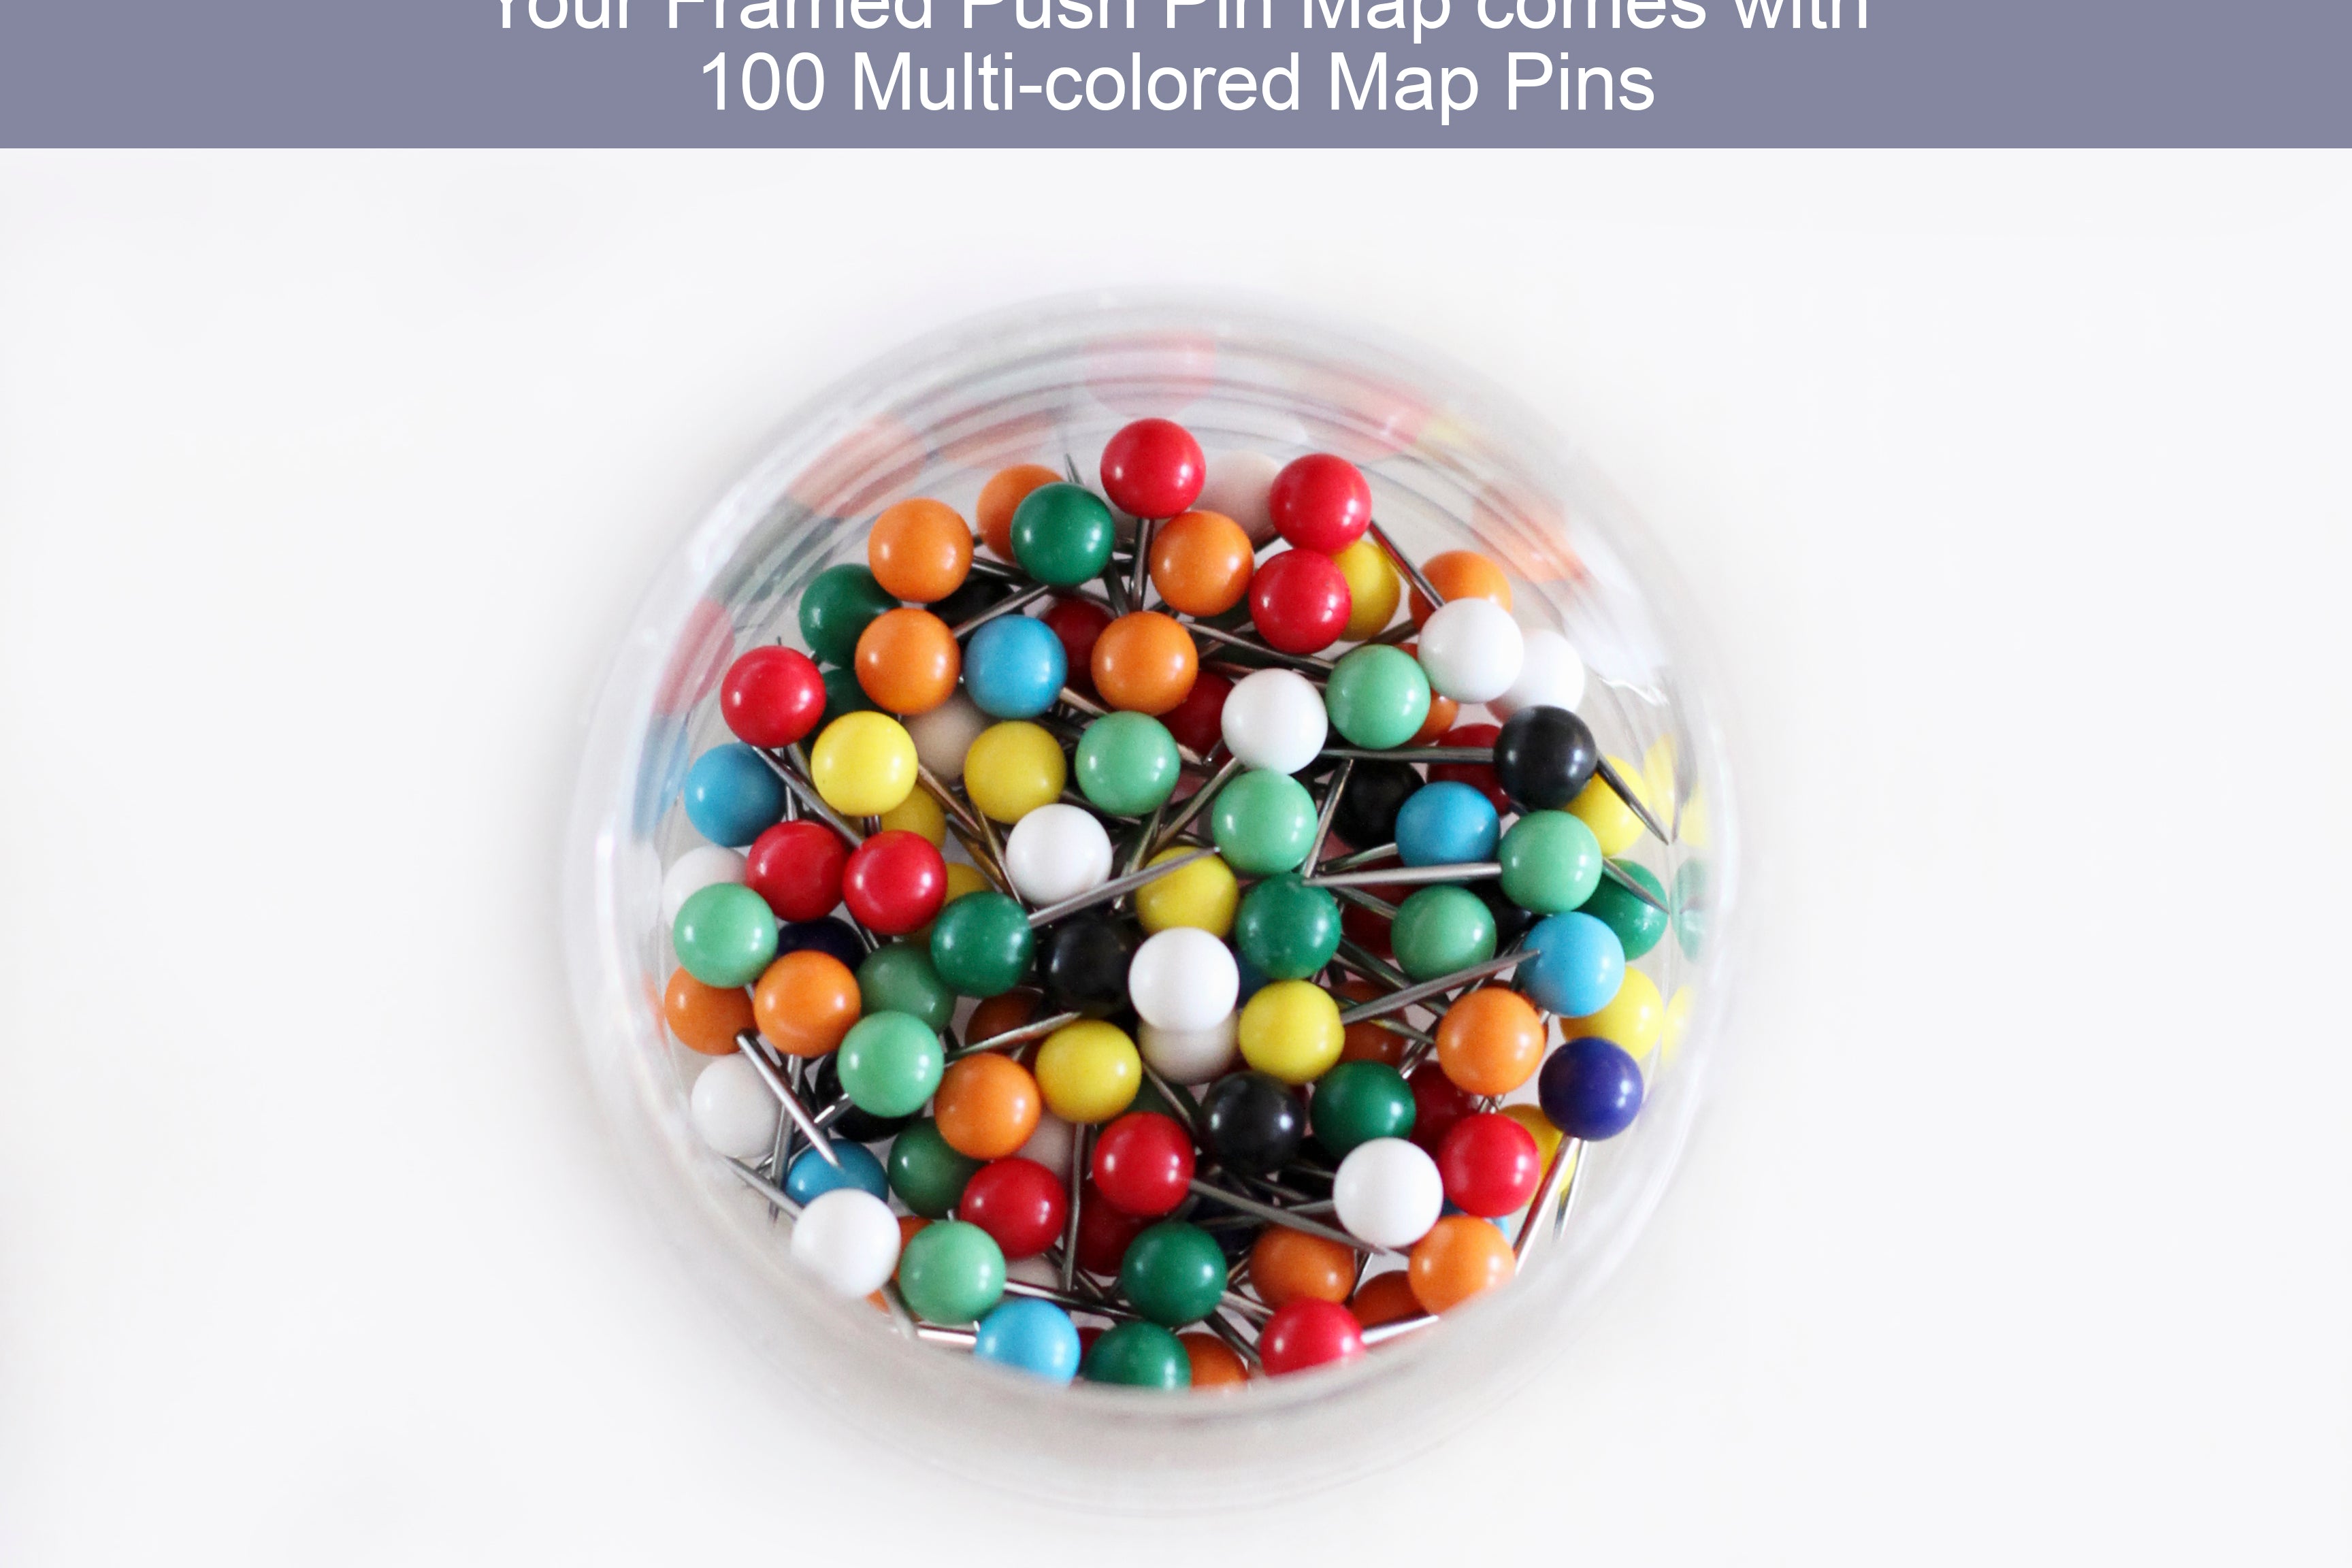 push pins for maps